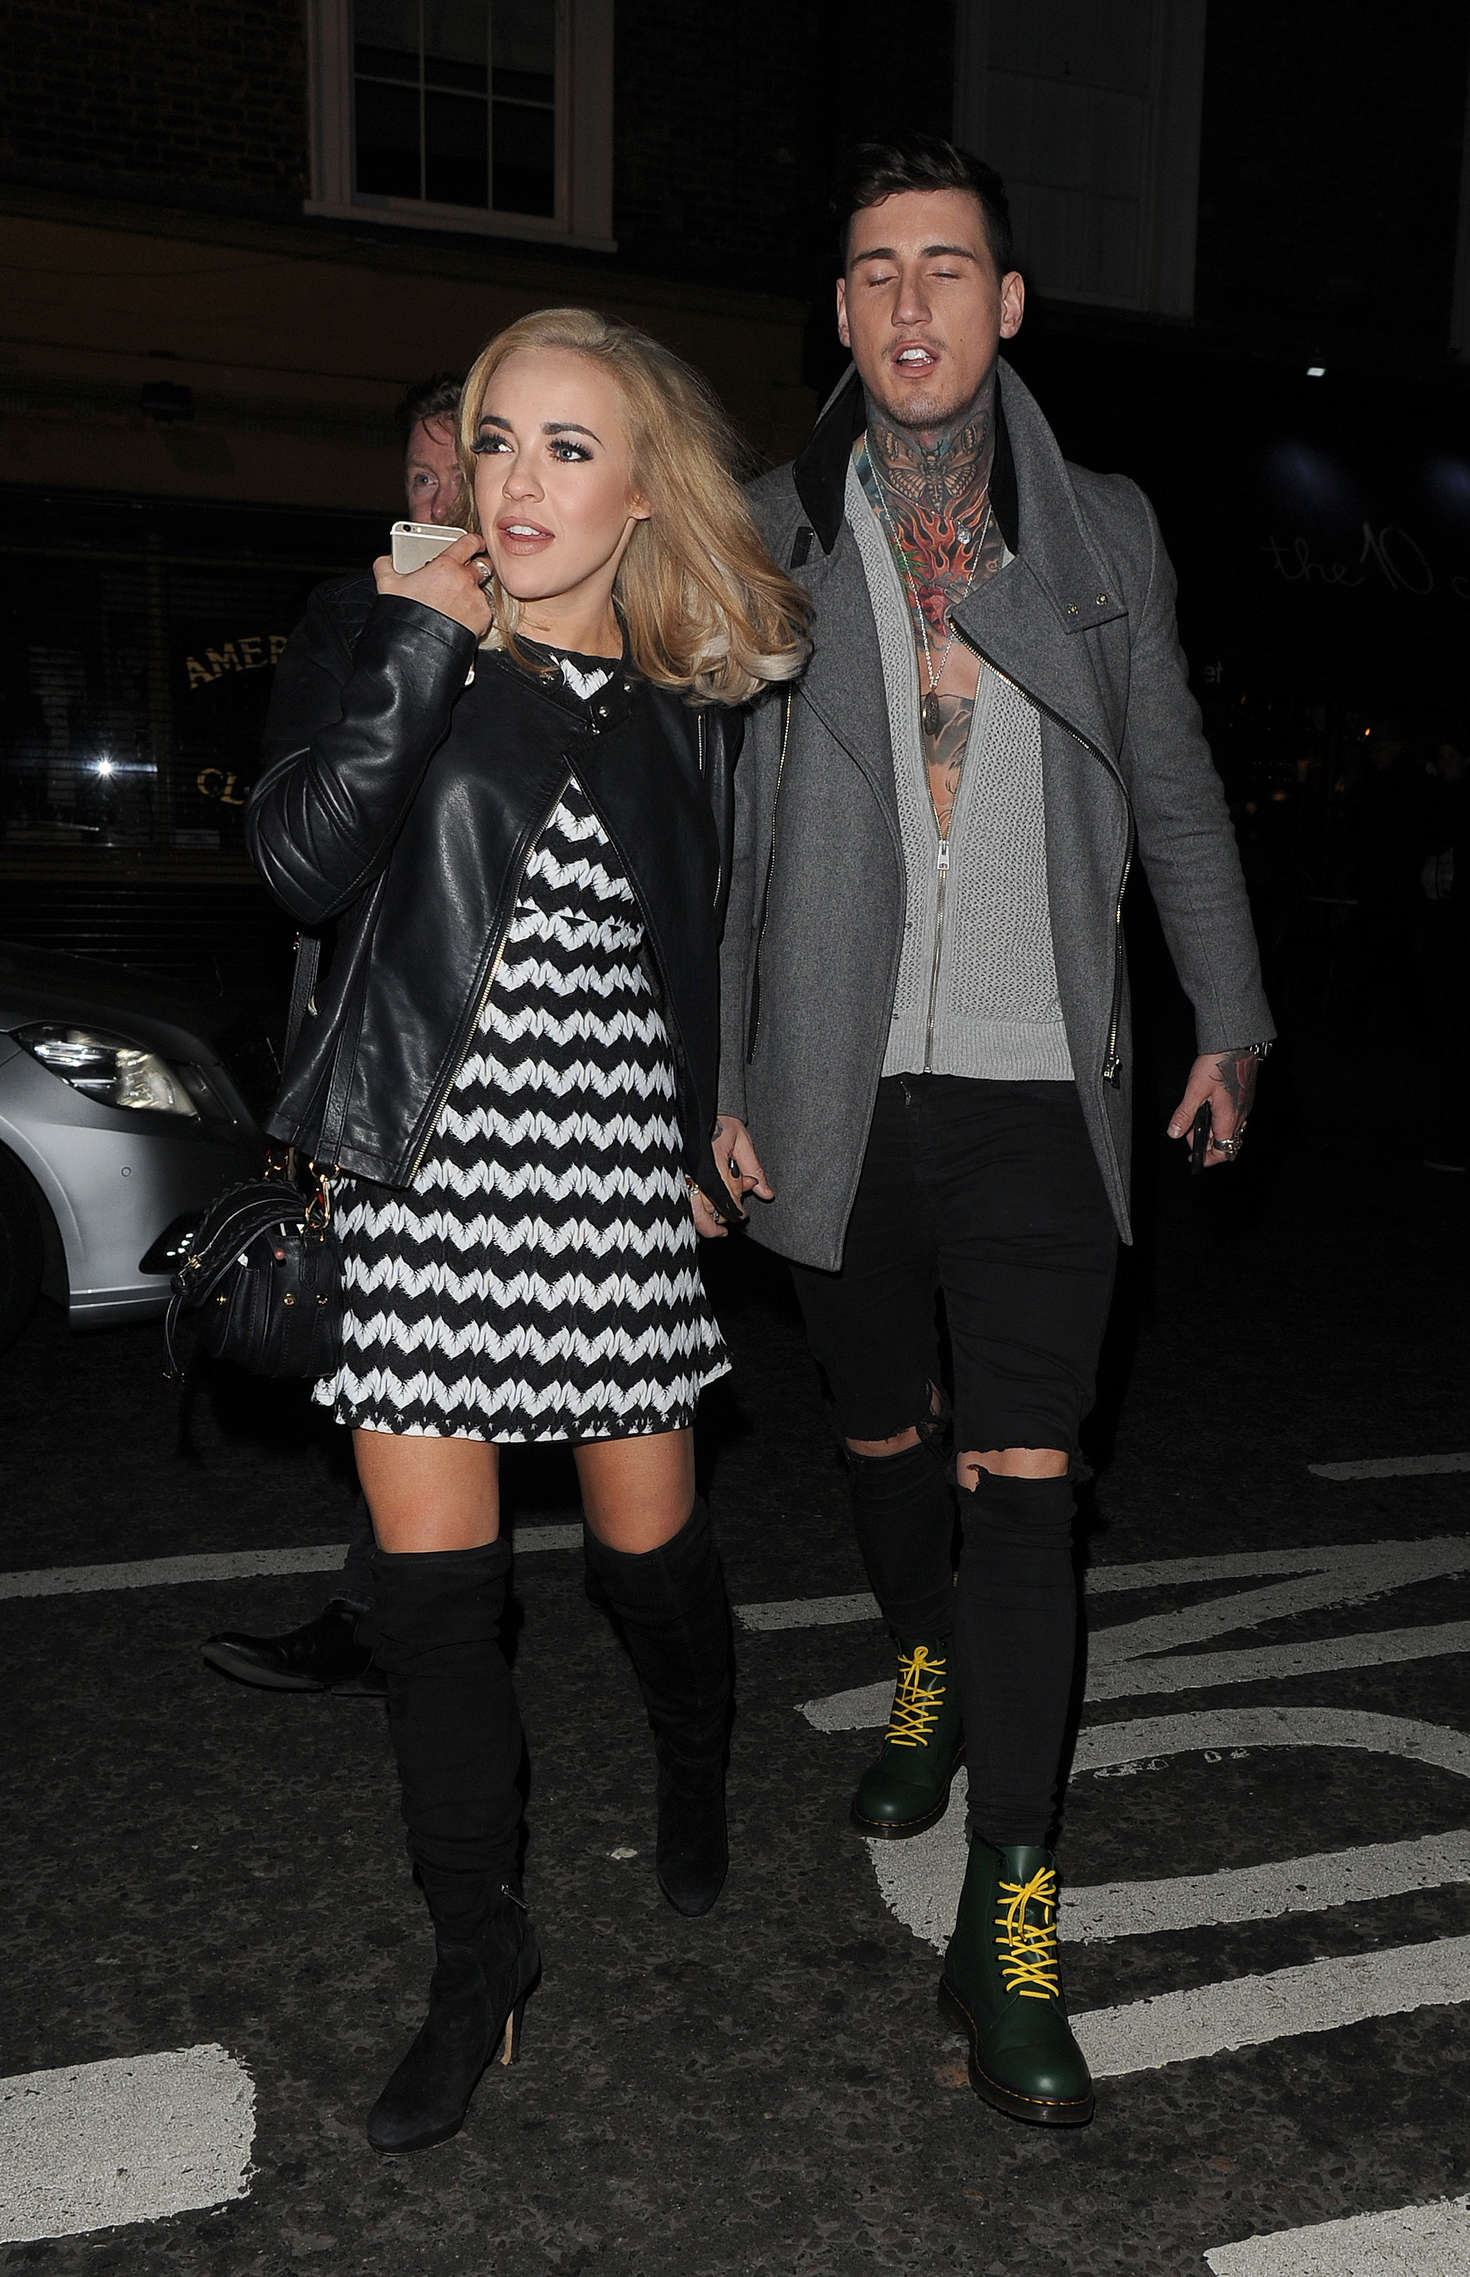 Stephanie Davis night out at Circus cocktail bar in Soho